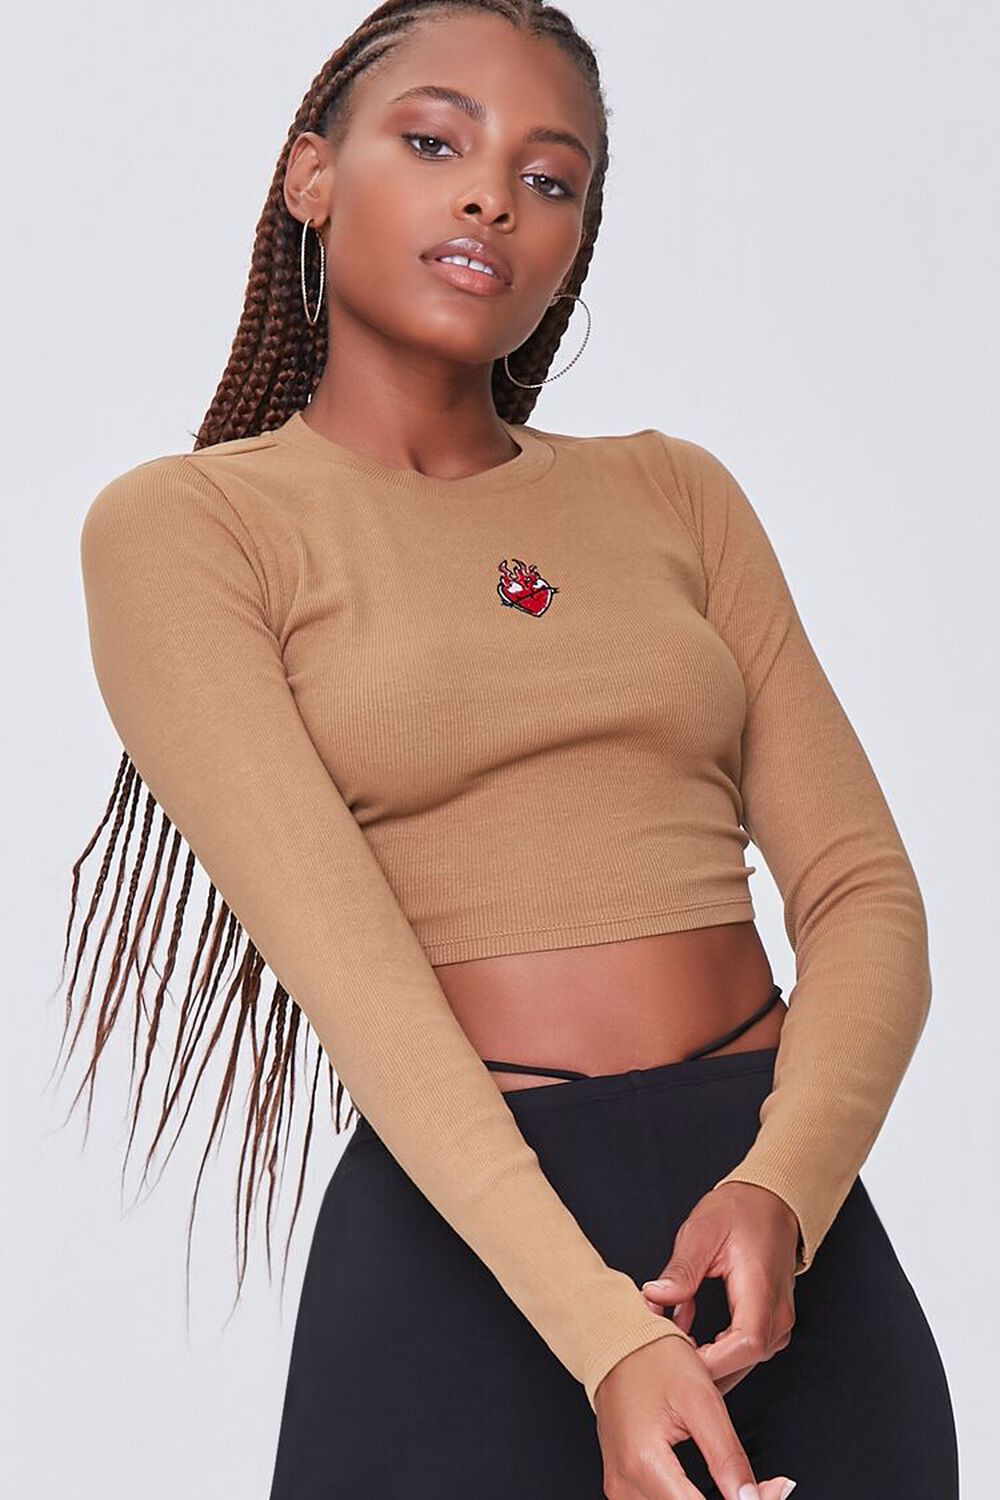 SAND/MULTI Embroidered Heart Graphic Crop Top, image 1